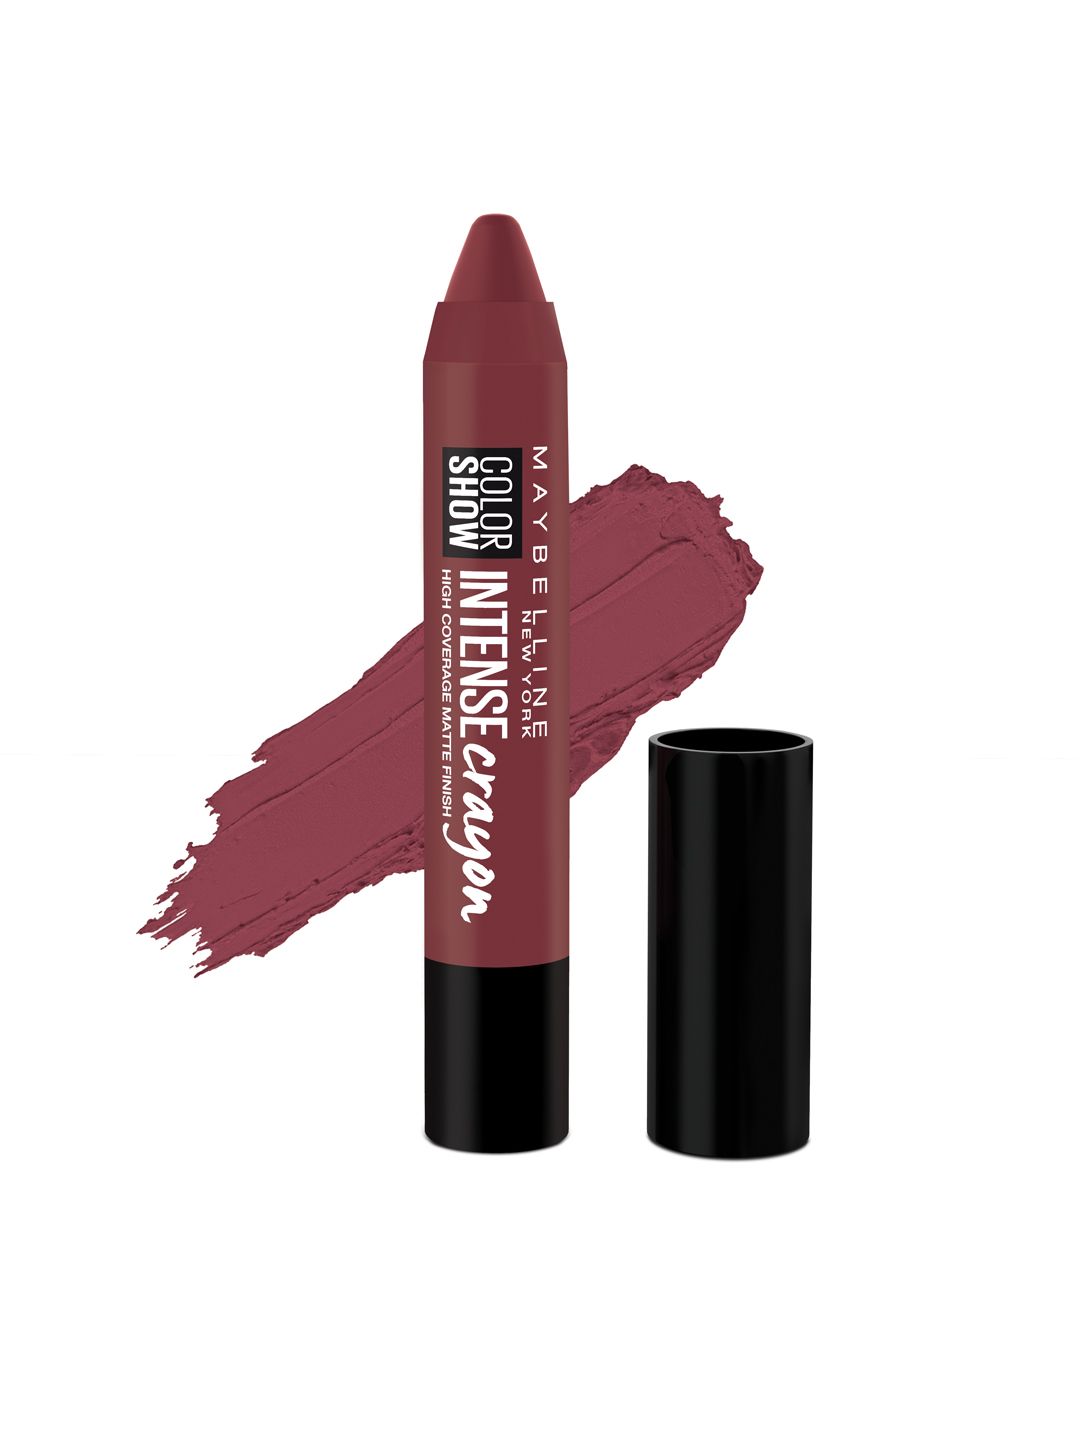 Maybelline Color Show Intense Crayon Lipstick - Bold Burgundy Price in India